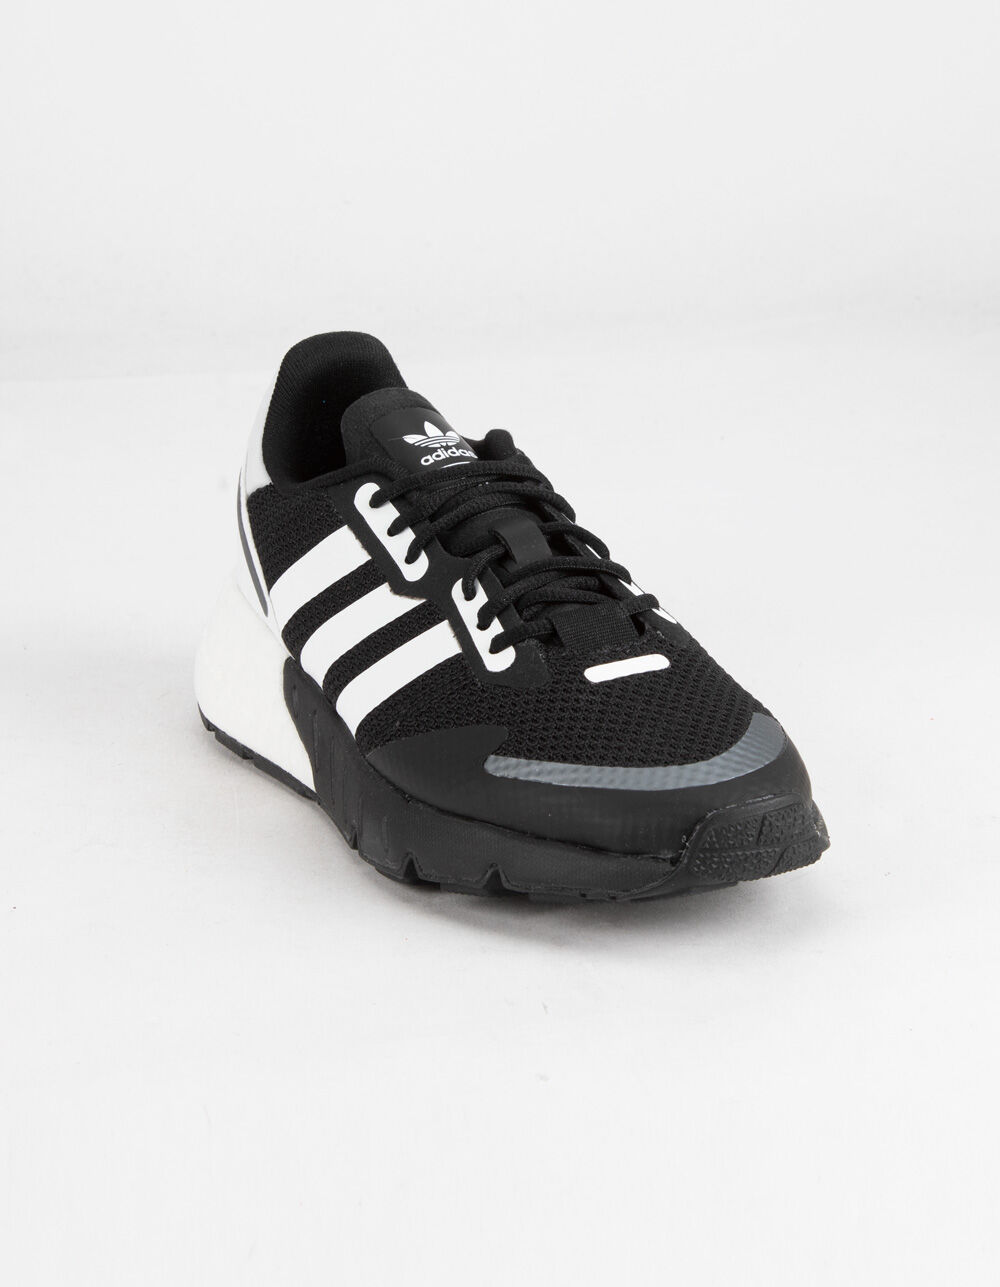 ADIDAS ZX 1K Boost Boys Shoes - BLACK/WHITE | Tillys